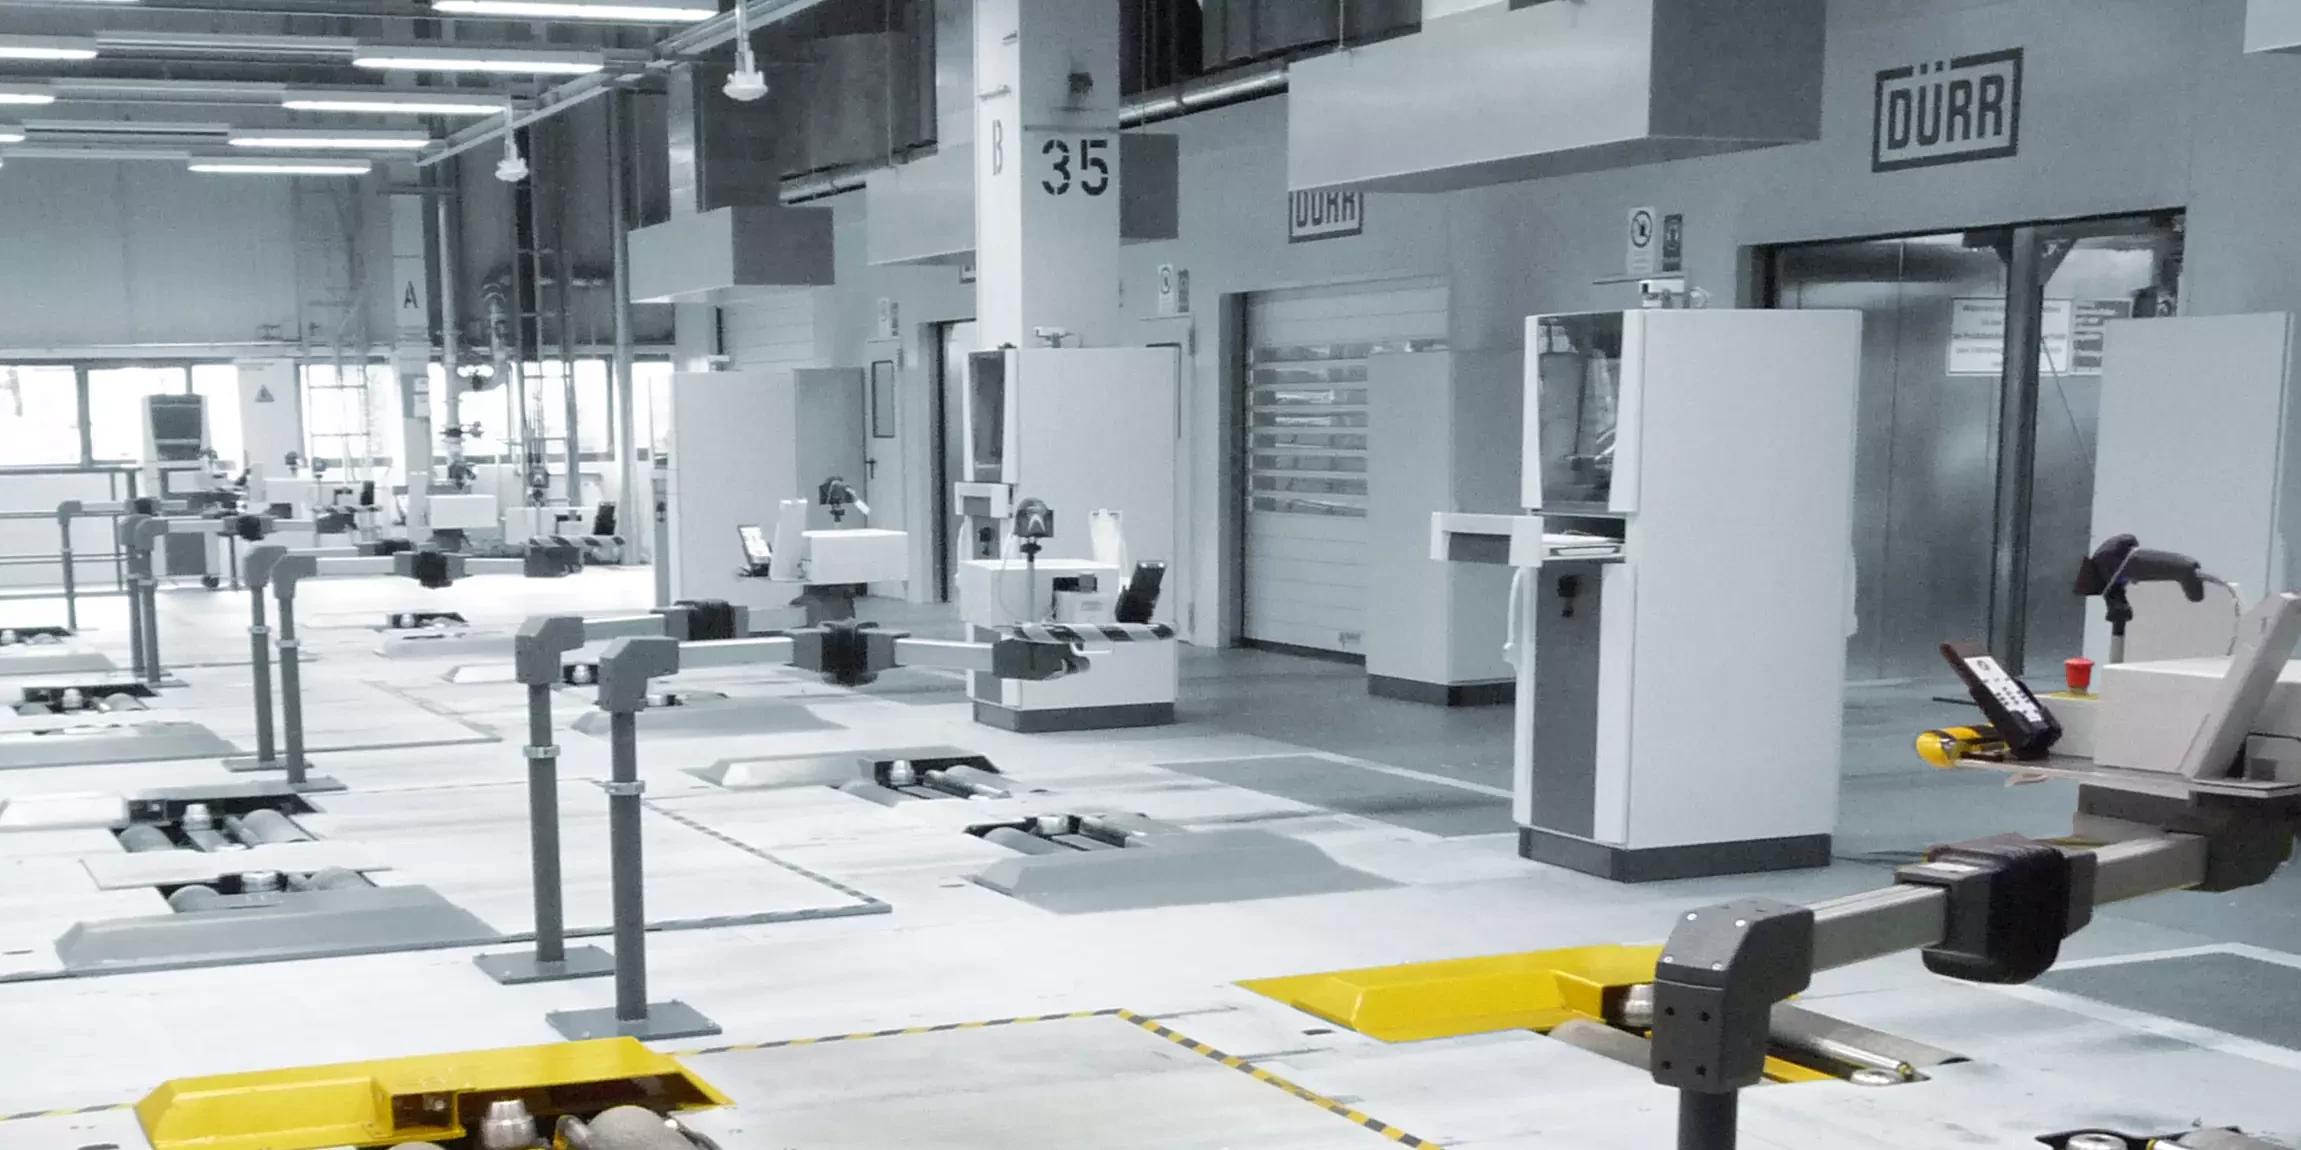 Dürr's Brake test stand for passenger cars and commercial vehicles 